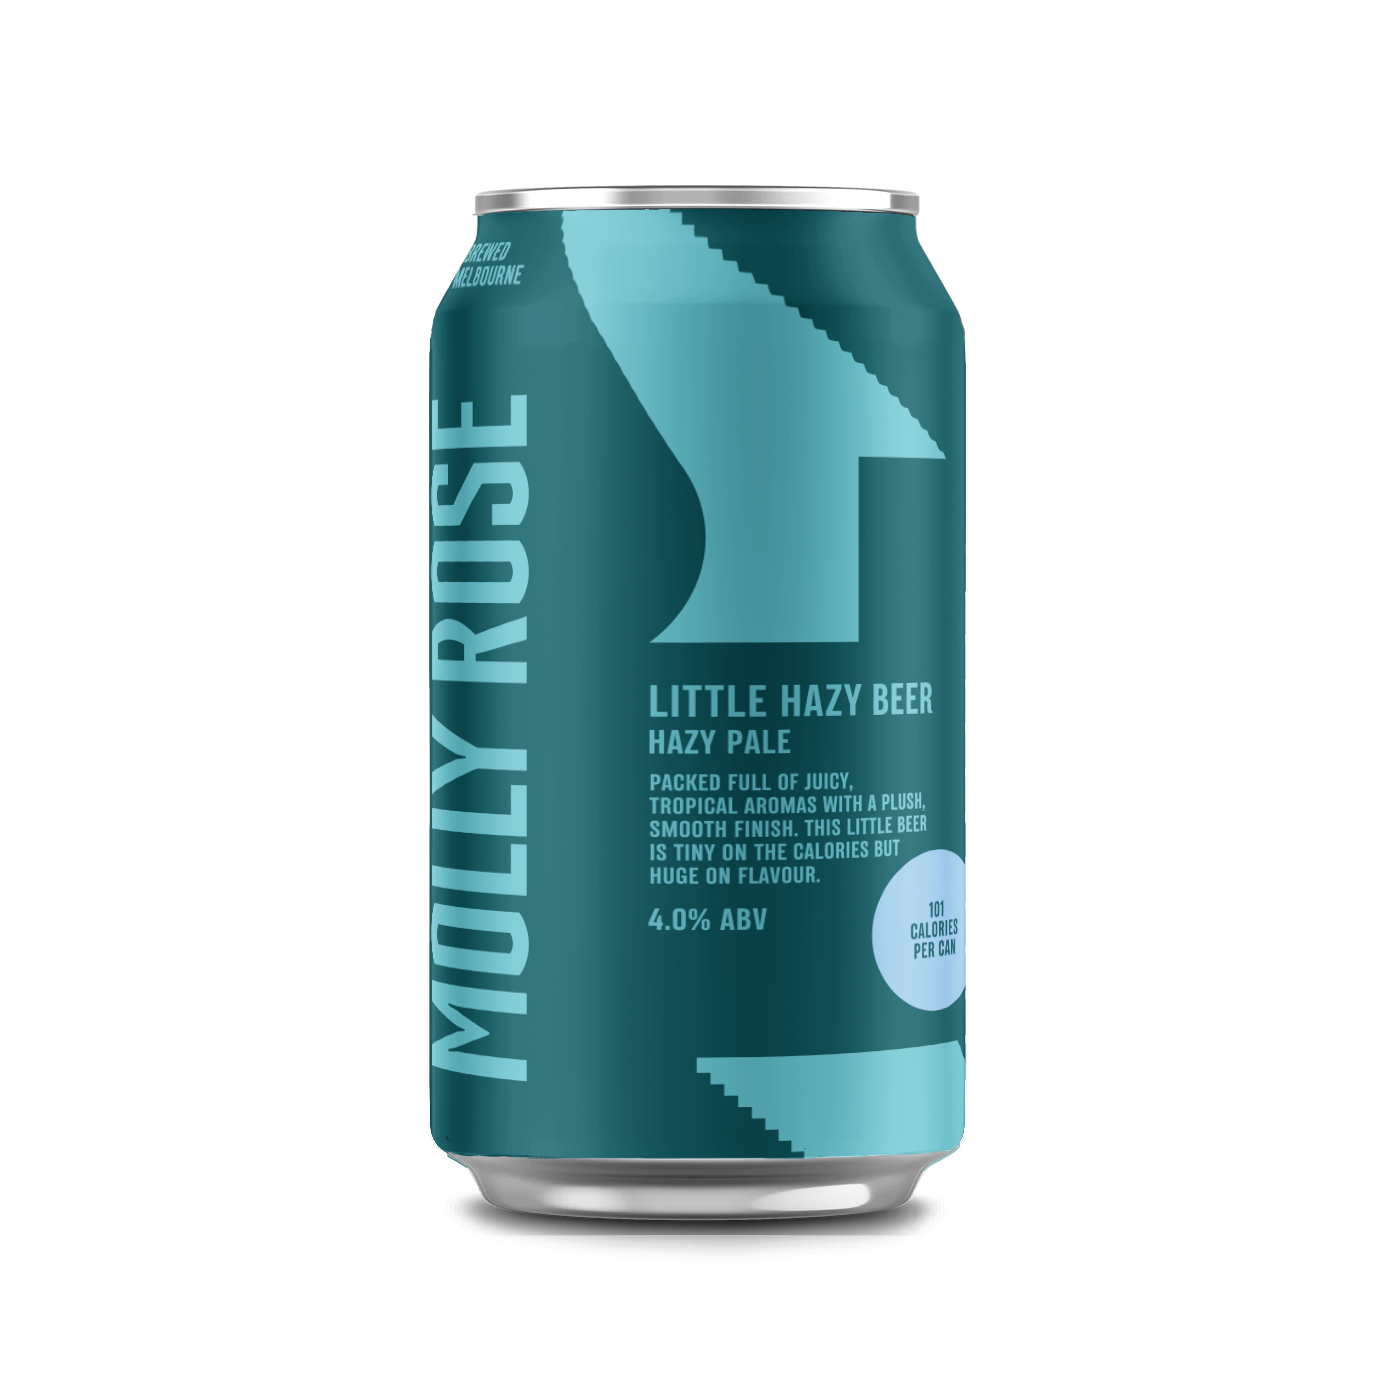 Little Hazy Beer · Molly Rose Brewing Co